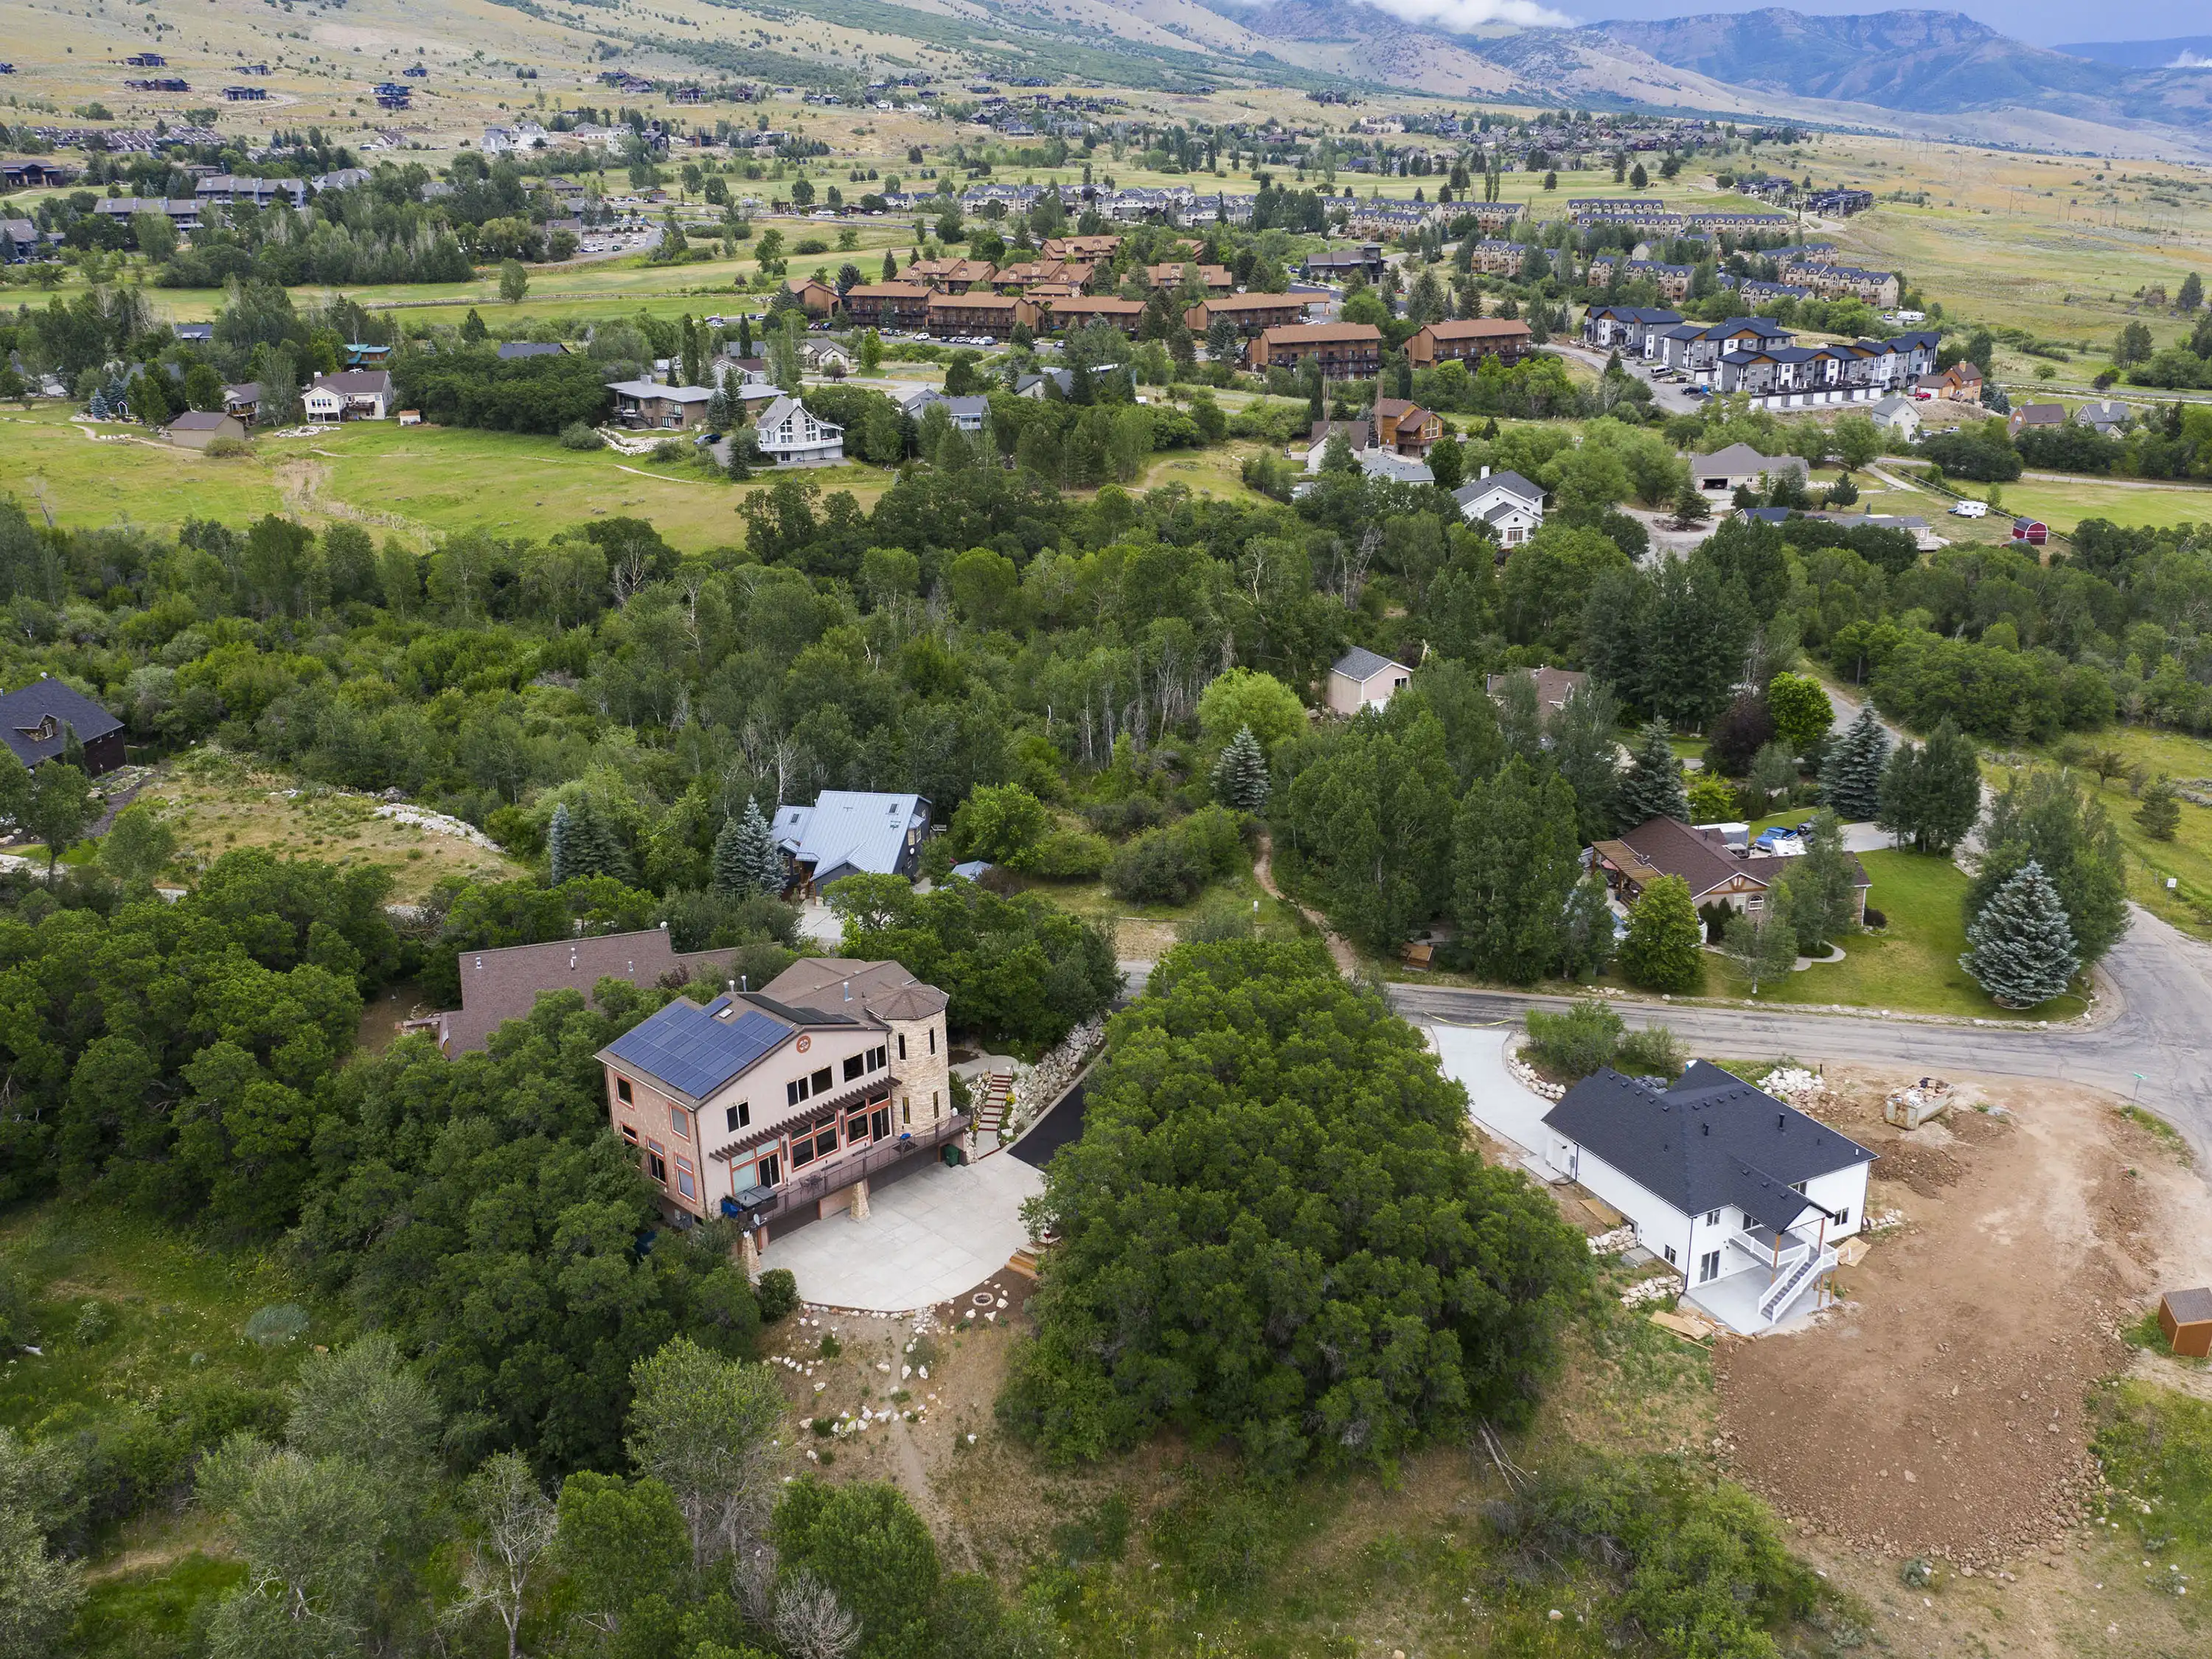 Patio Springs Drone Photo of Homes & Land With Mountain Views